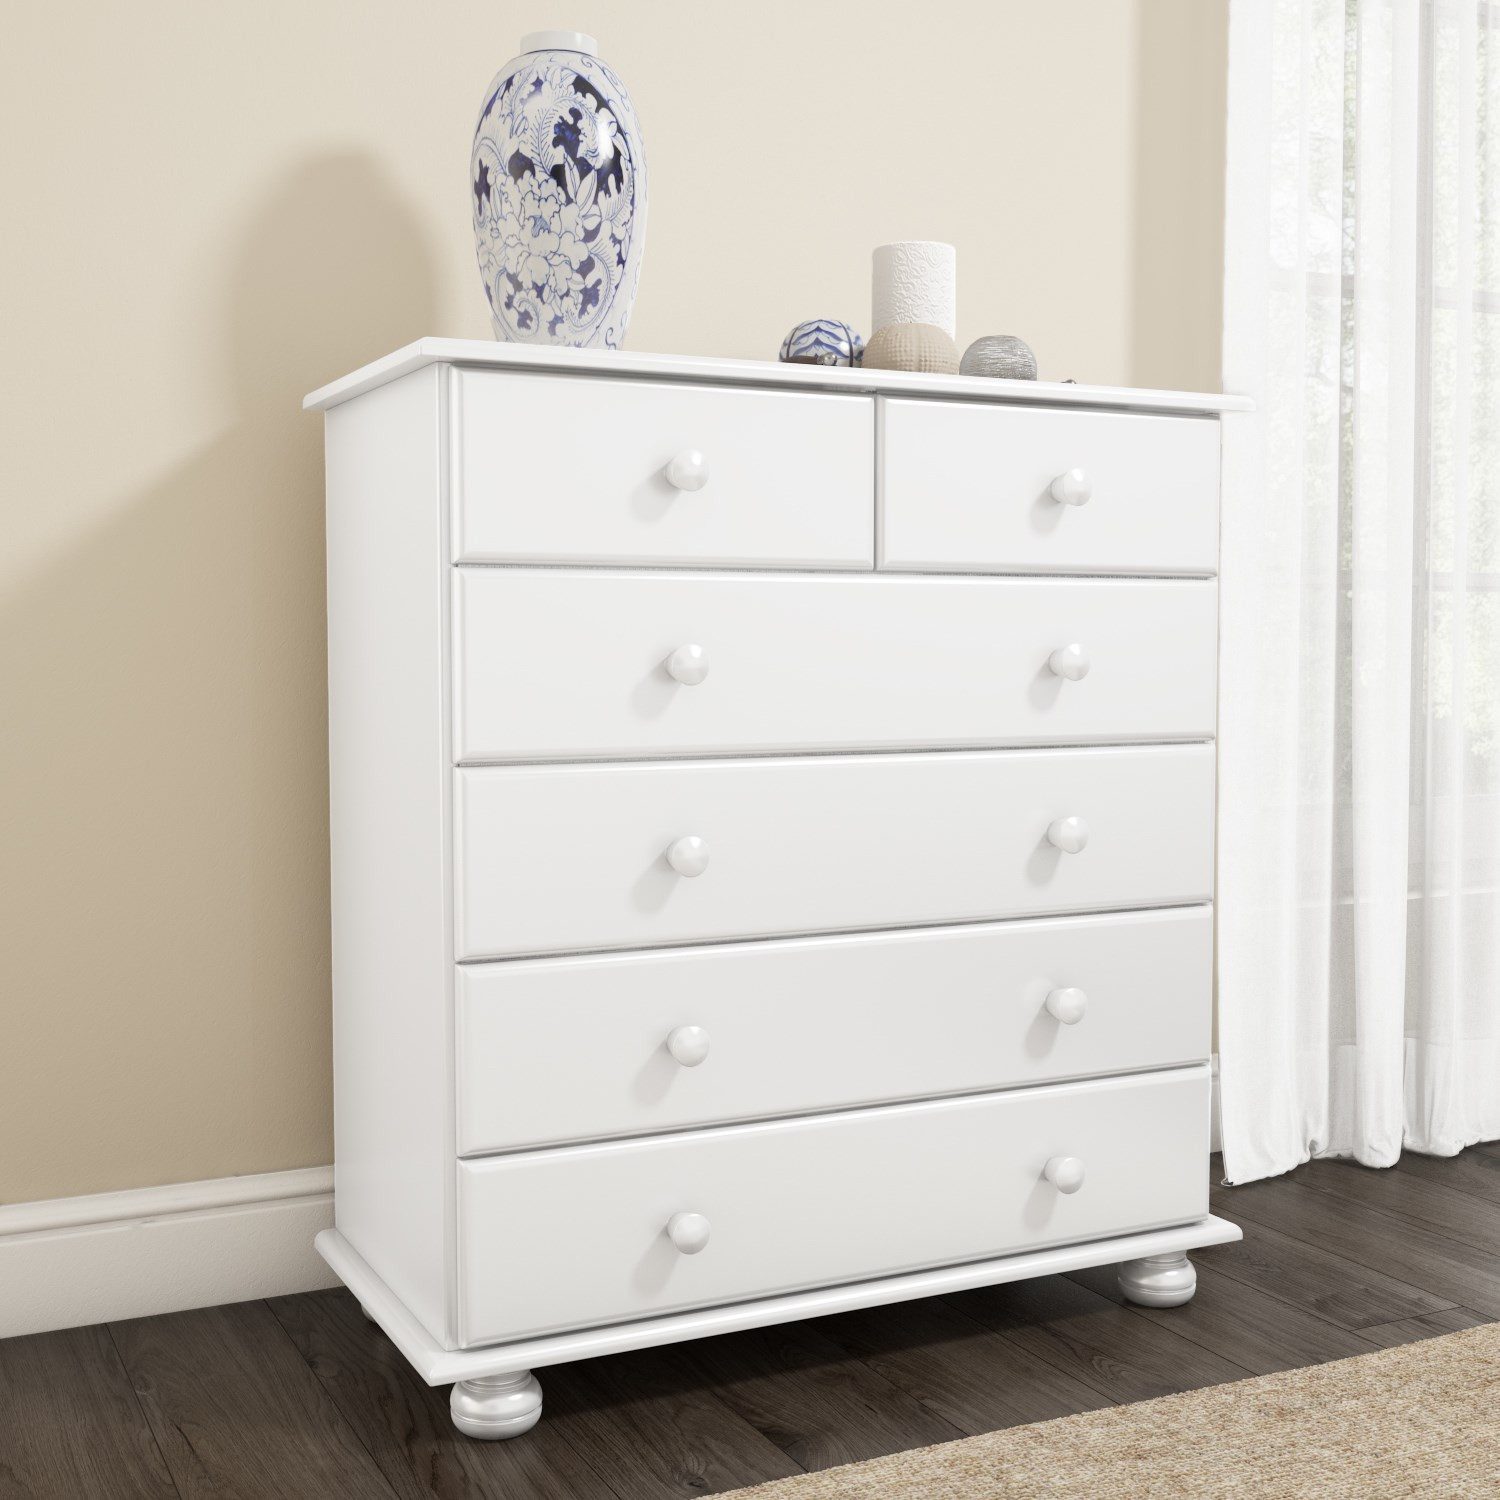 White Bedroom Cabinet
 New White Hamilton 2 4 Chest of Drawers storage cabinet